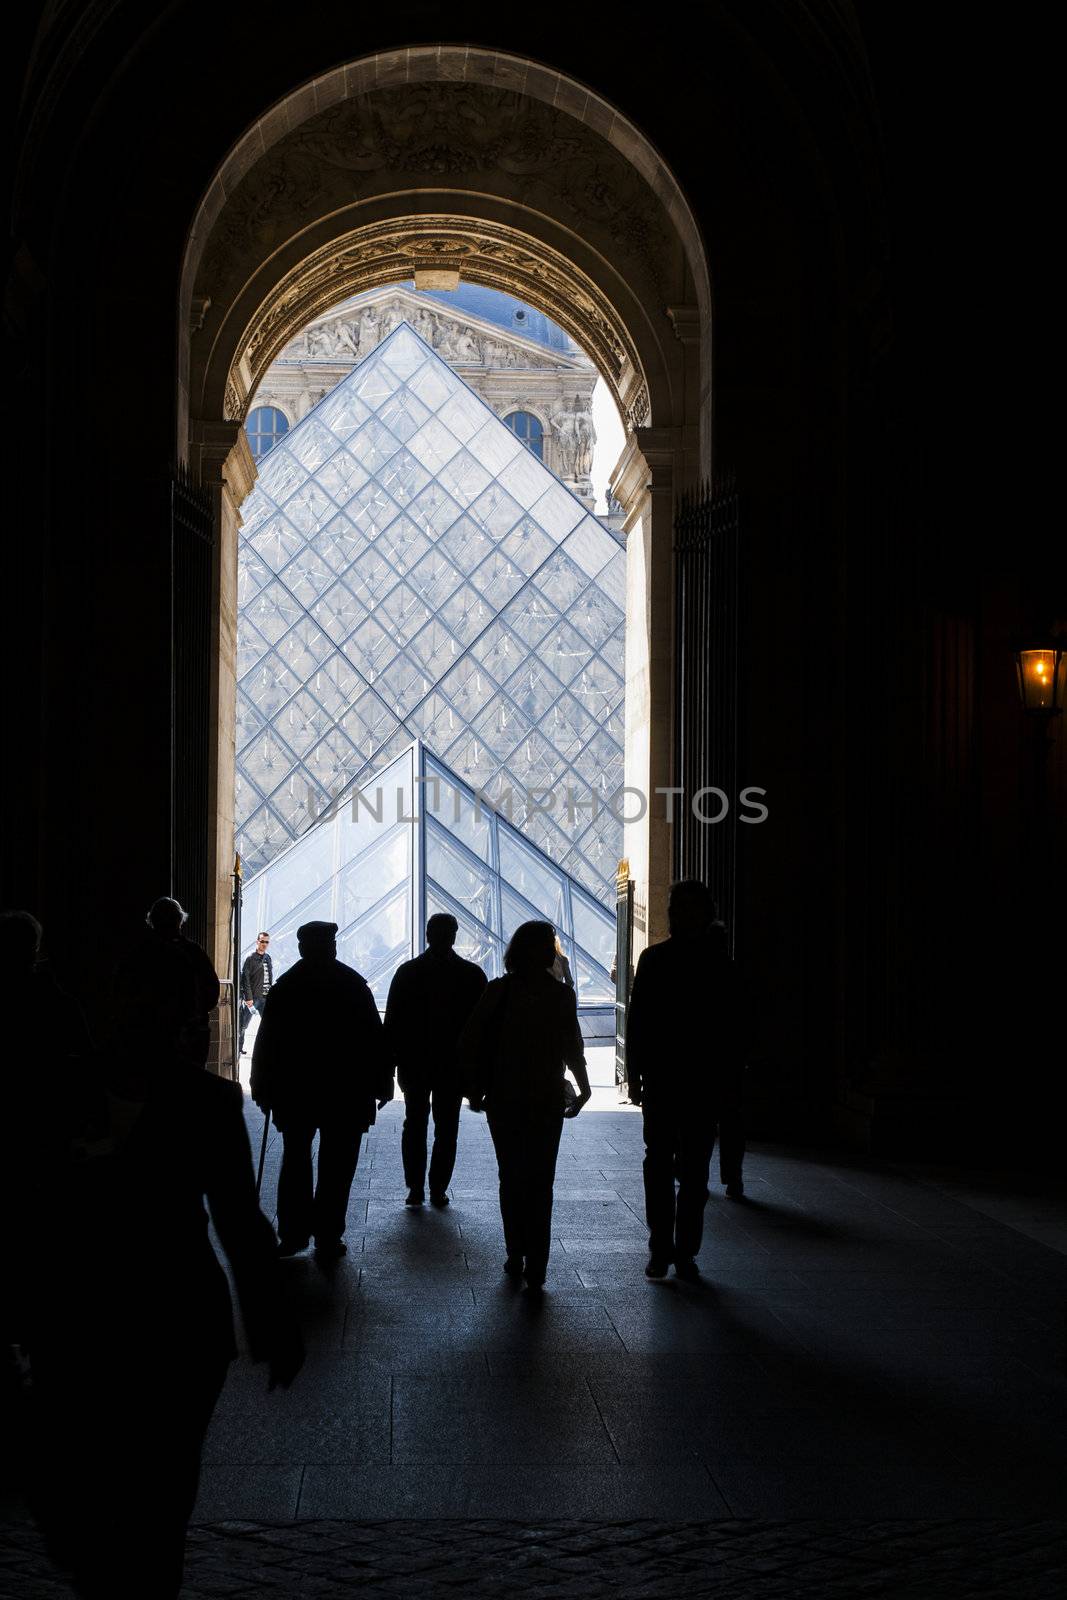 PARIS - APRIL 13, 2008. Silhouettes Louvre visitors against Glass Pyramid on April 13, 2008. The Louvre is one of the world's largest museums and one of most central landmarks of Paris. Architect I.M.Pei is author of glass pyramid over a new entrance in the main court.